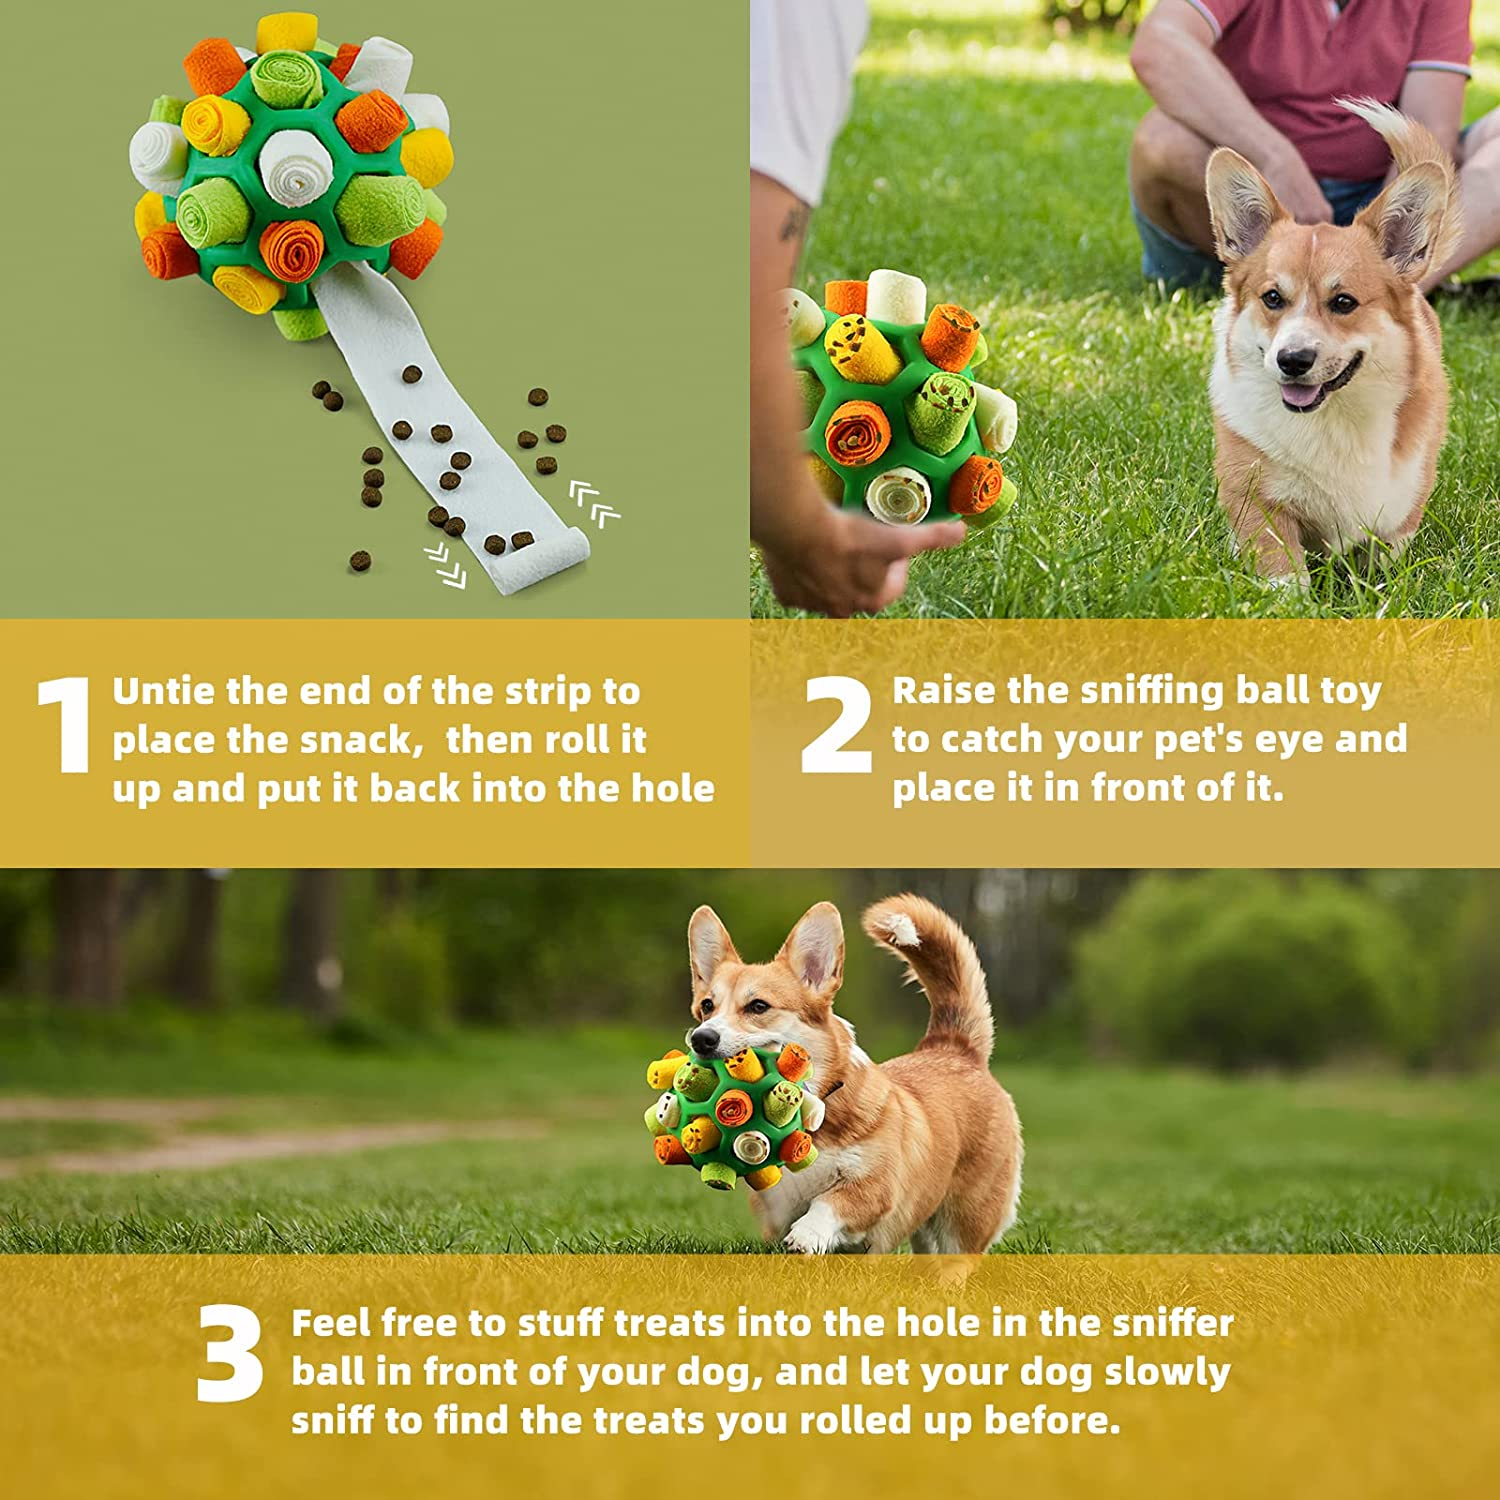 Interactive Dog Toy Encourage Natural Foraging Skills Slow Food